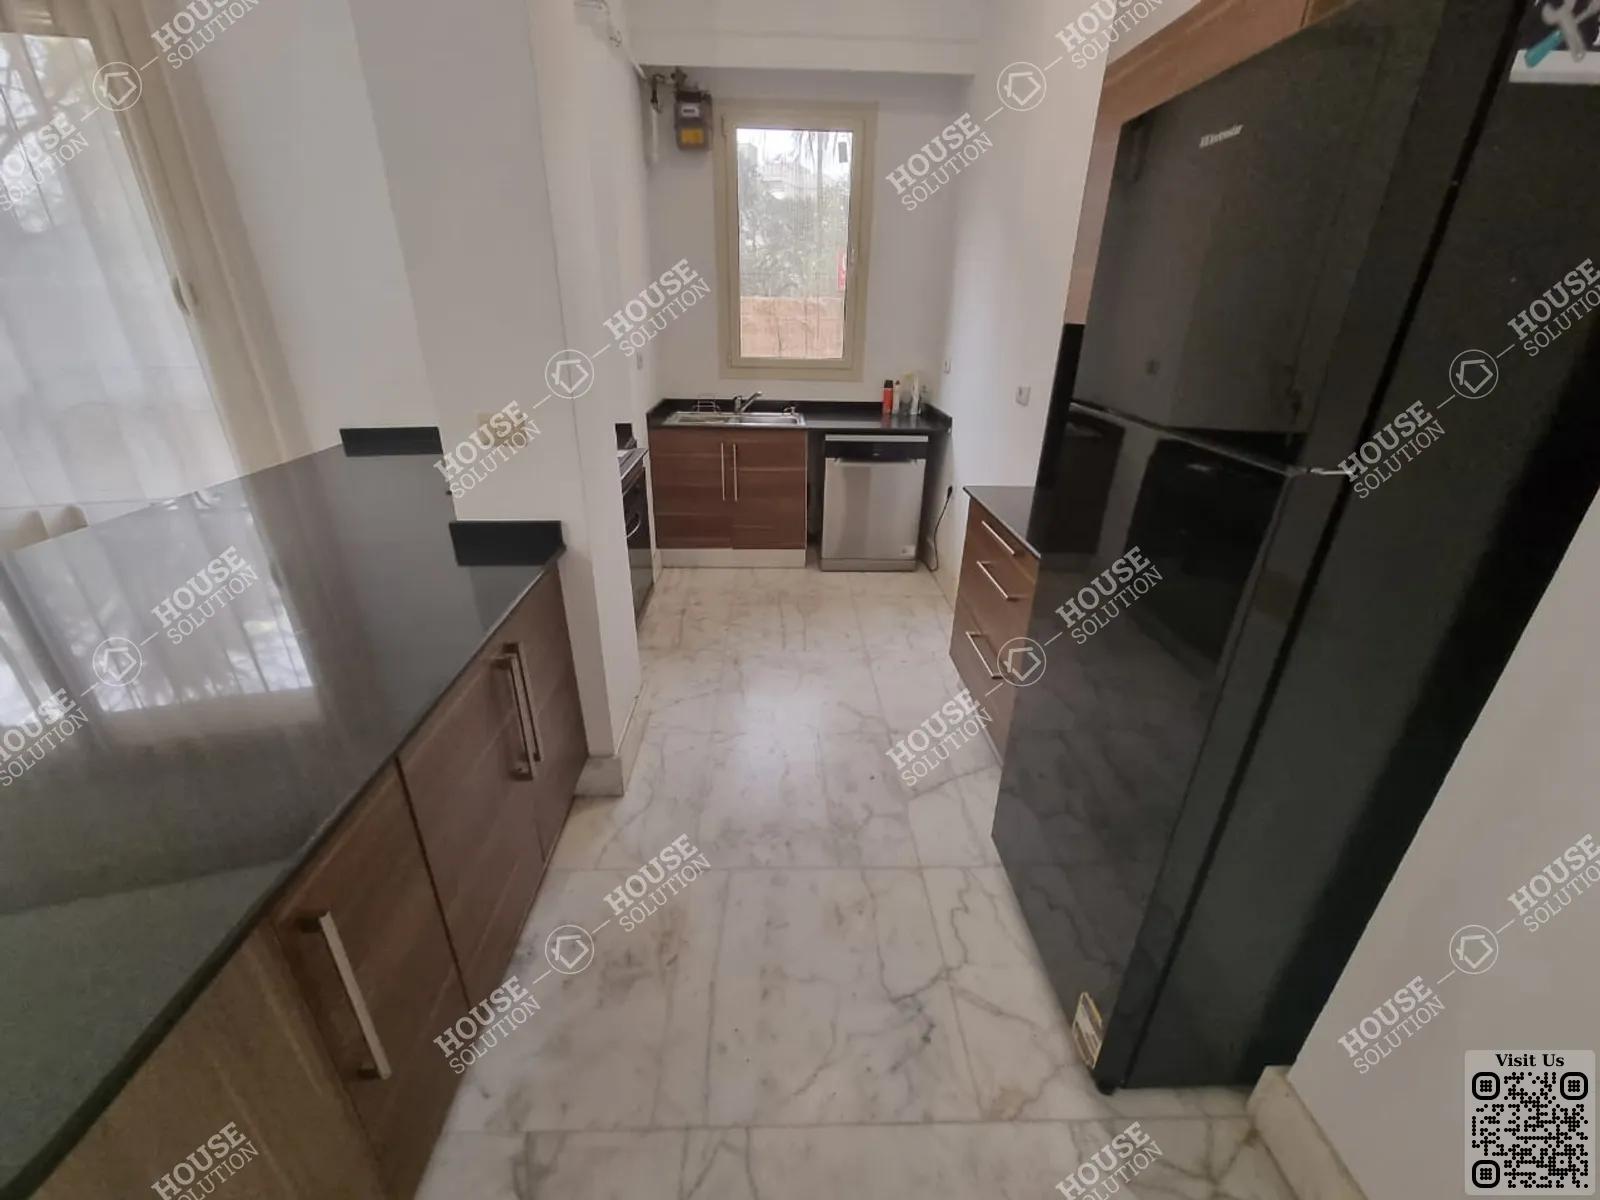 KITCHEN  @ Apartments For Rent In Maadi Maadi Sarayat Area: 170 m² consists of 2 Bedrooms 3 Bathrooms Modern furnished 5 stars #5268-2